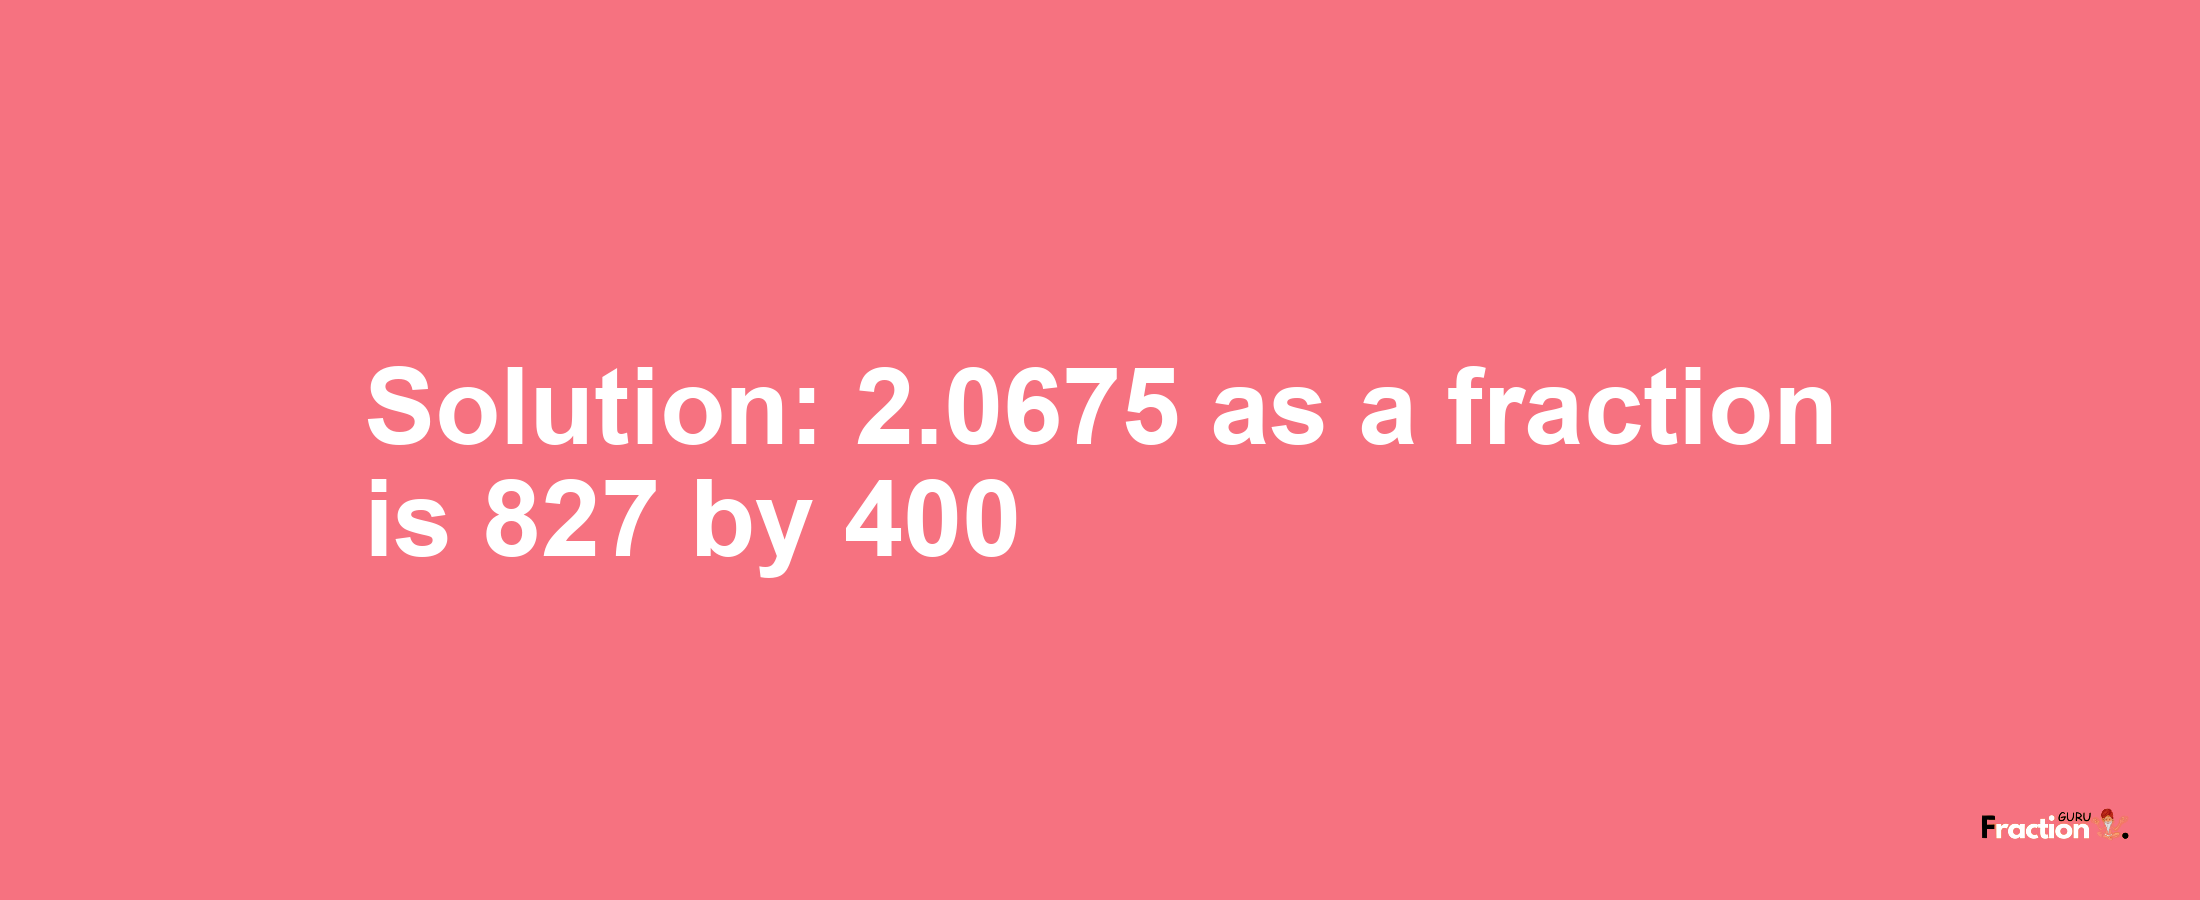 Solution:2.0675 as a fraction is 827/400